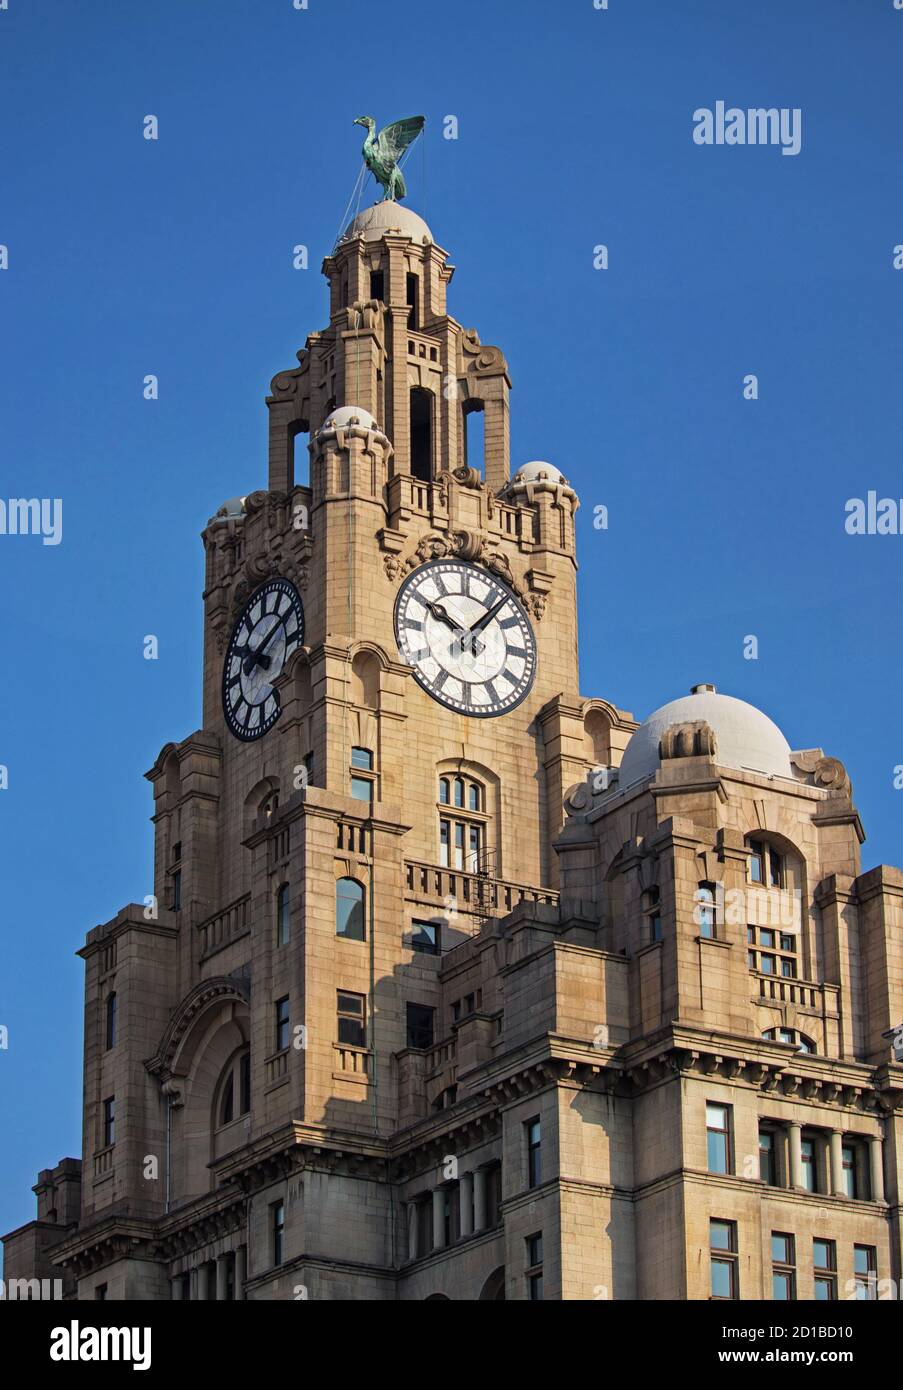 The clock tower on the Royal Liver Building, housing one of Liverpool's  famous liver birds. Stock Photo